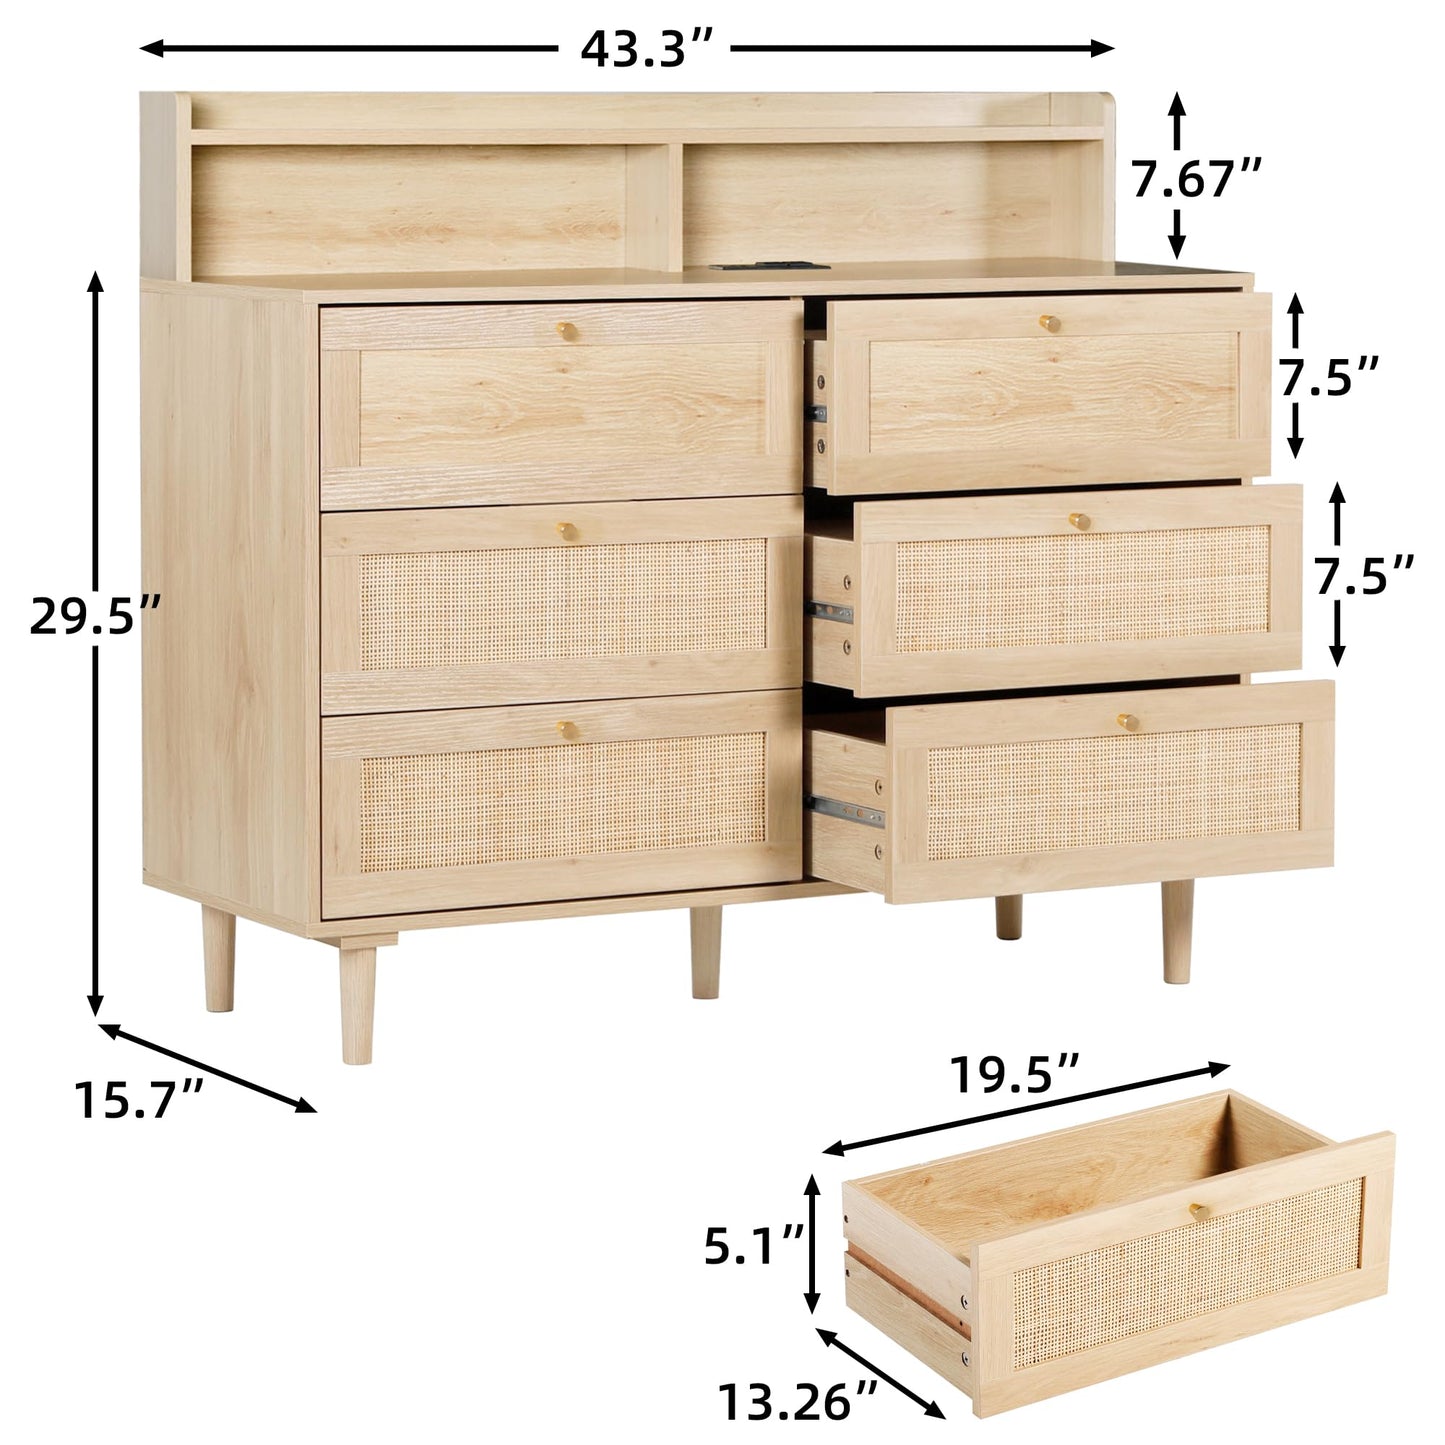 FUQARHY Rattan Dresser for Bedroom with Shelves, Modern 6 Drawer Double Dresser with Charging Station, Wood Chest of Drawers for Bedroom, Living